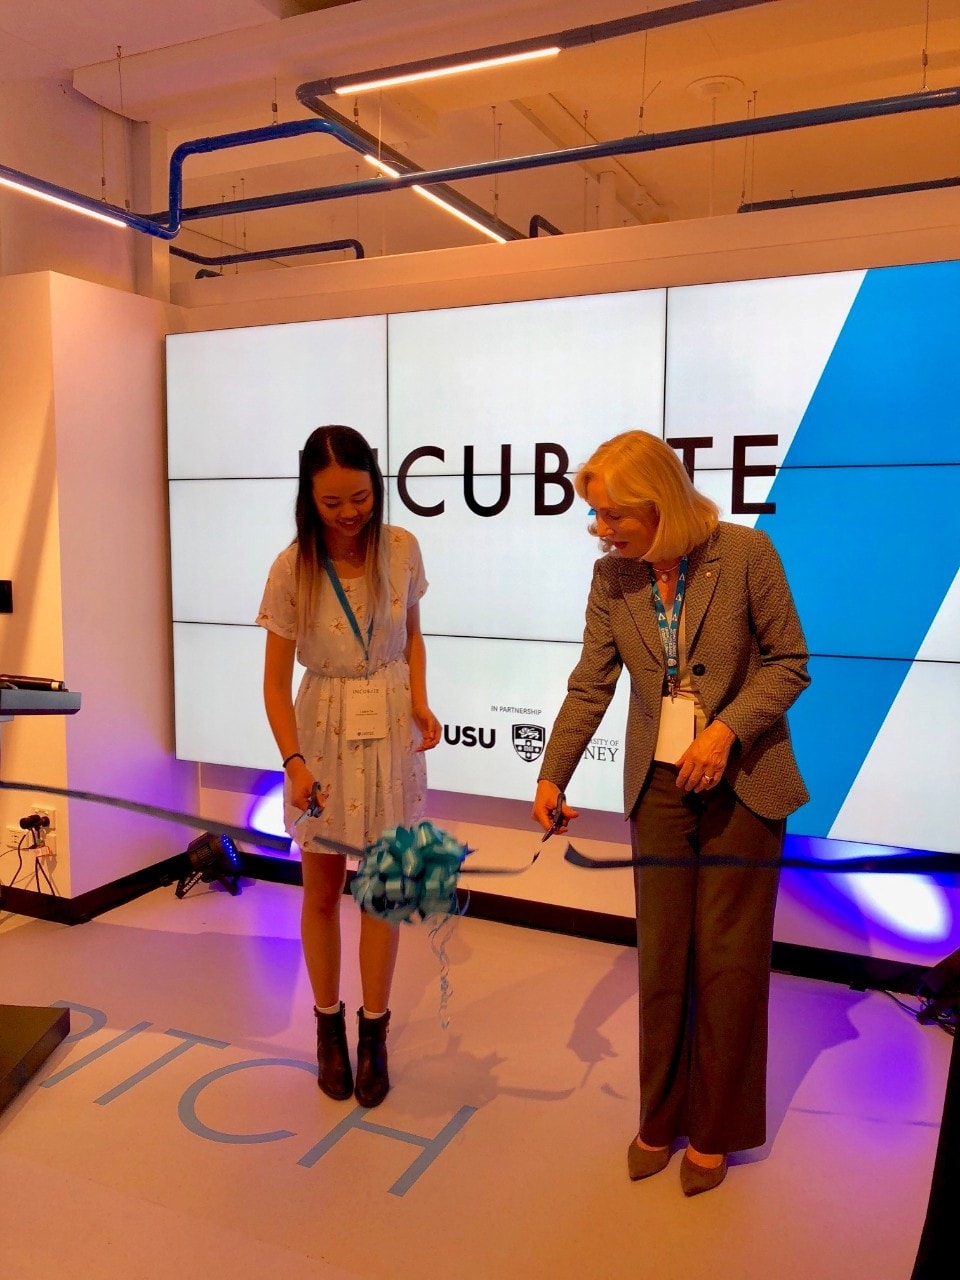 Chancellor Belinda Hutchinson AM and Liliana Tai, President of the University of Sydney Union, officially open the INCUBATE Hub.